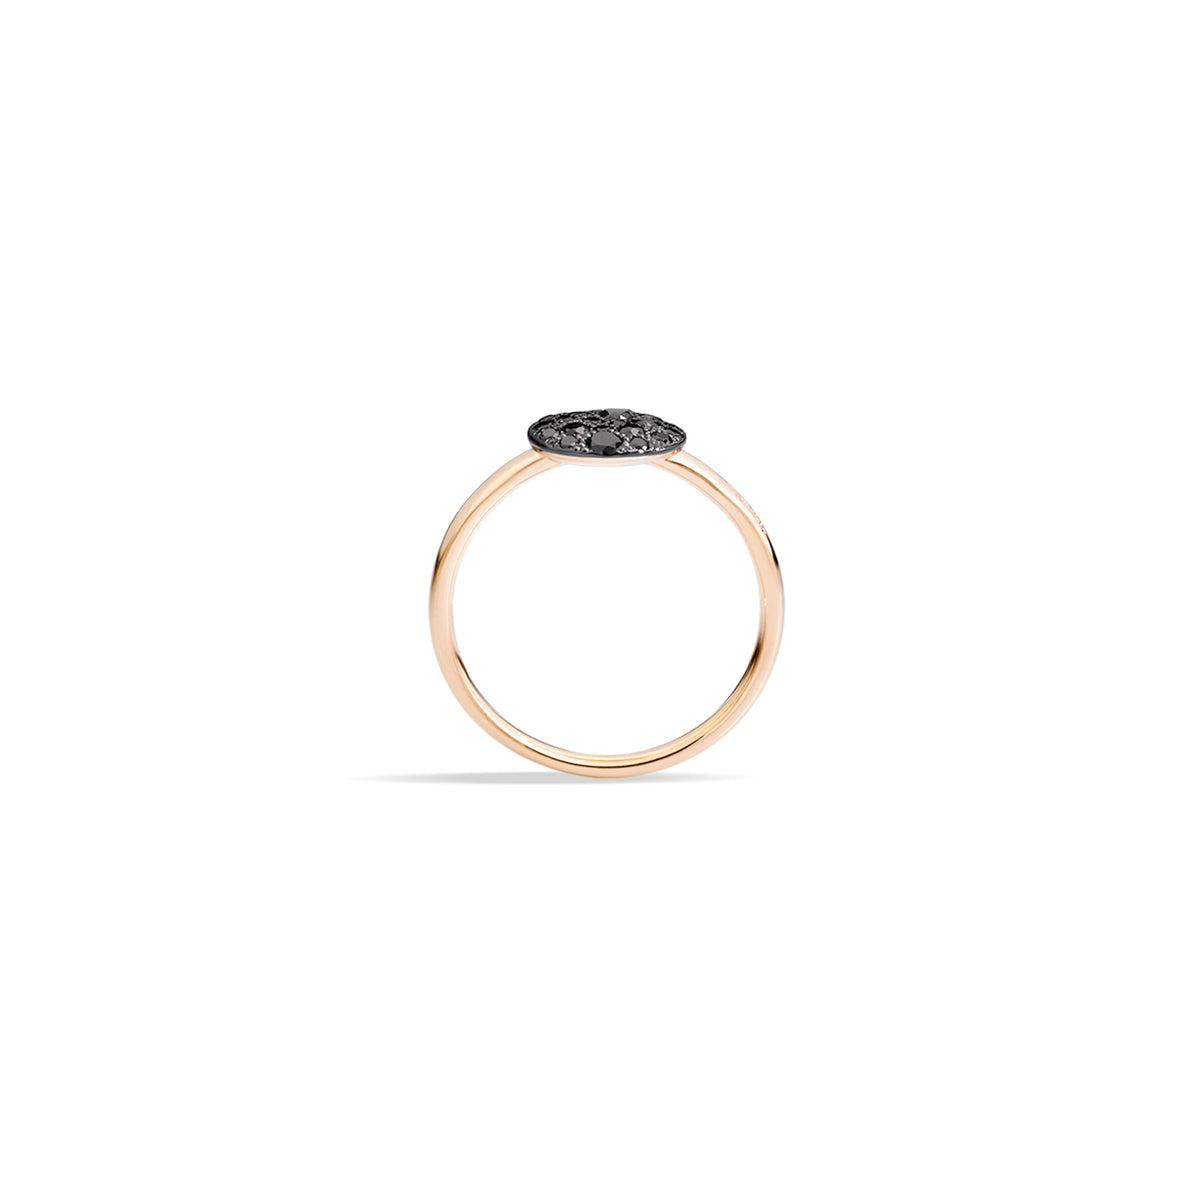 Sabbia Ring in 18k Rose Gold with Pave Black Diamonds - Orsini Jewellers NZ